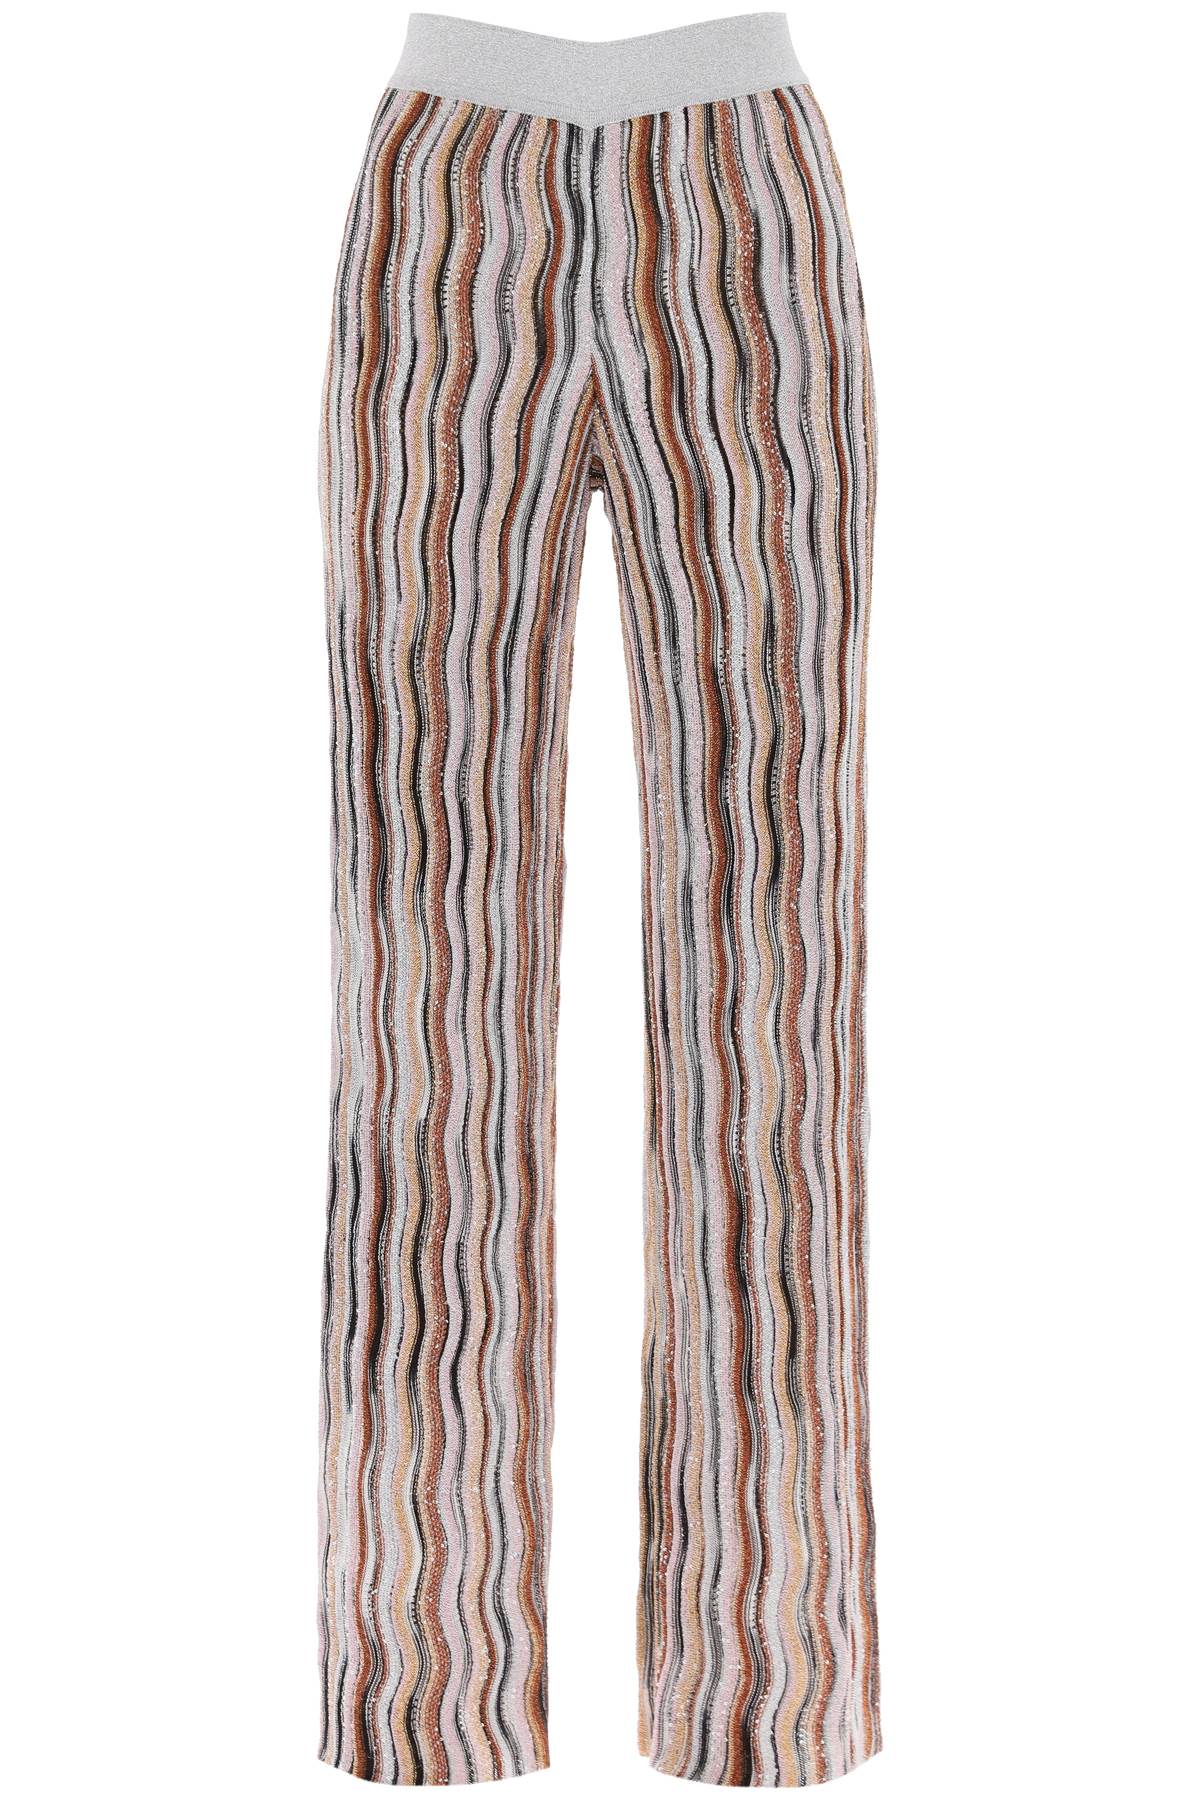 MISSONI SEQUINED KNIT PANTS WITH WAVY MOTIF